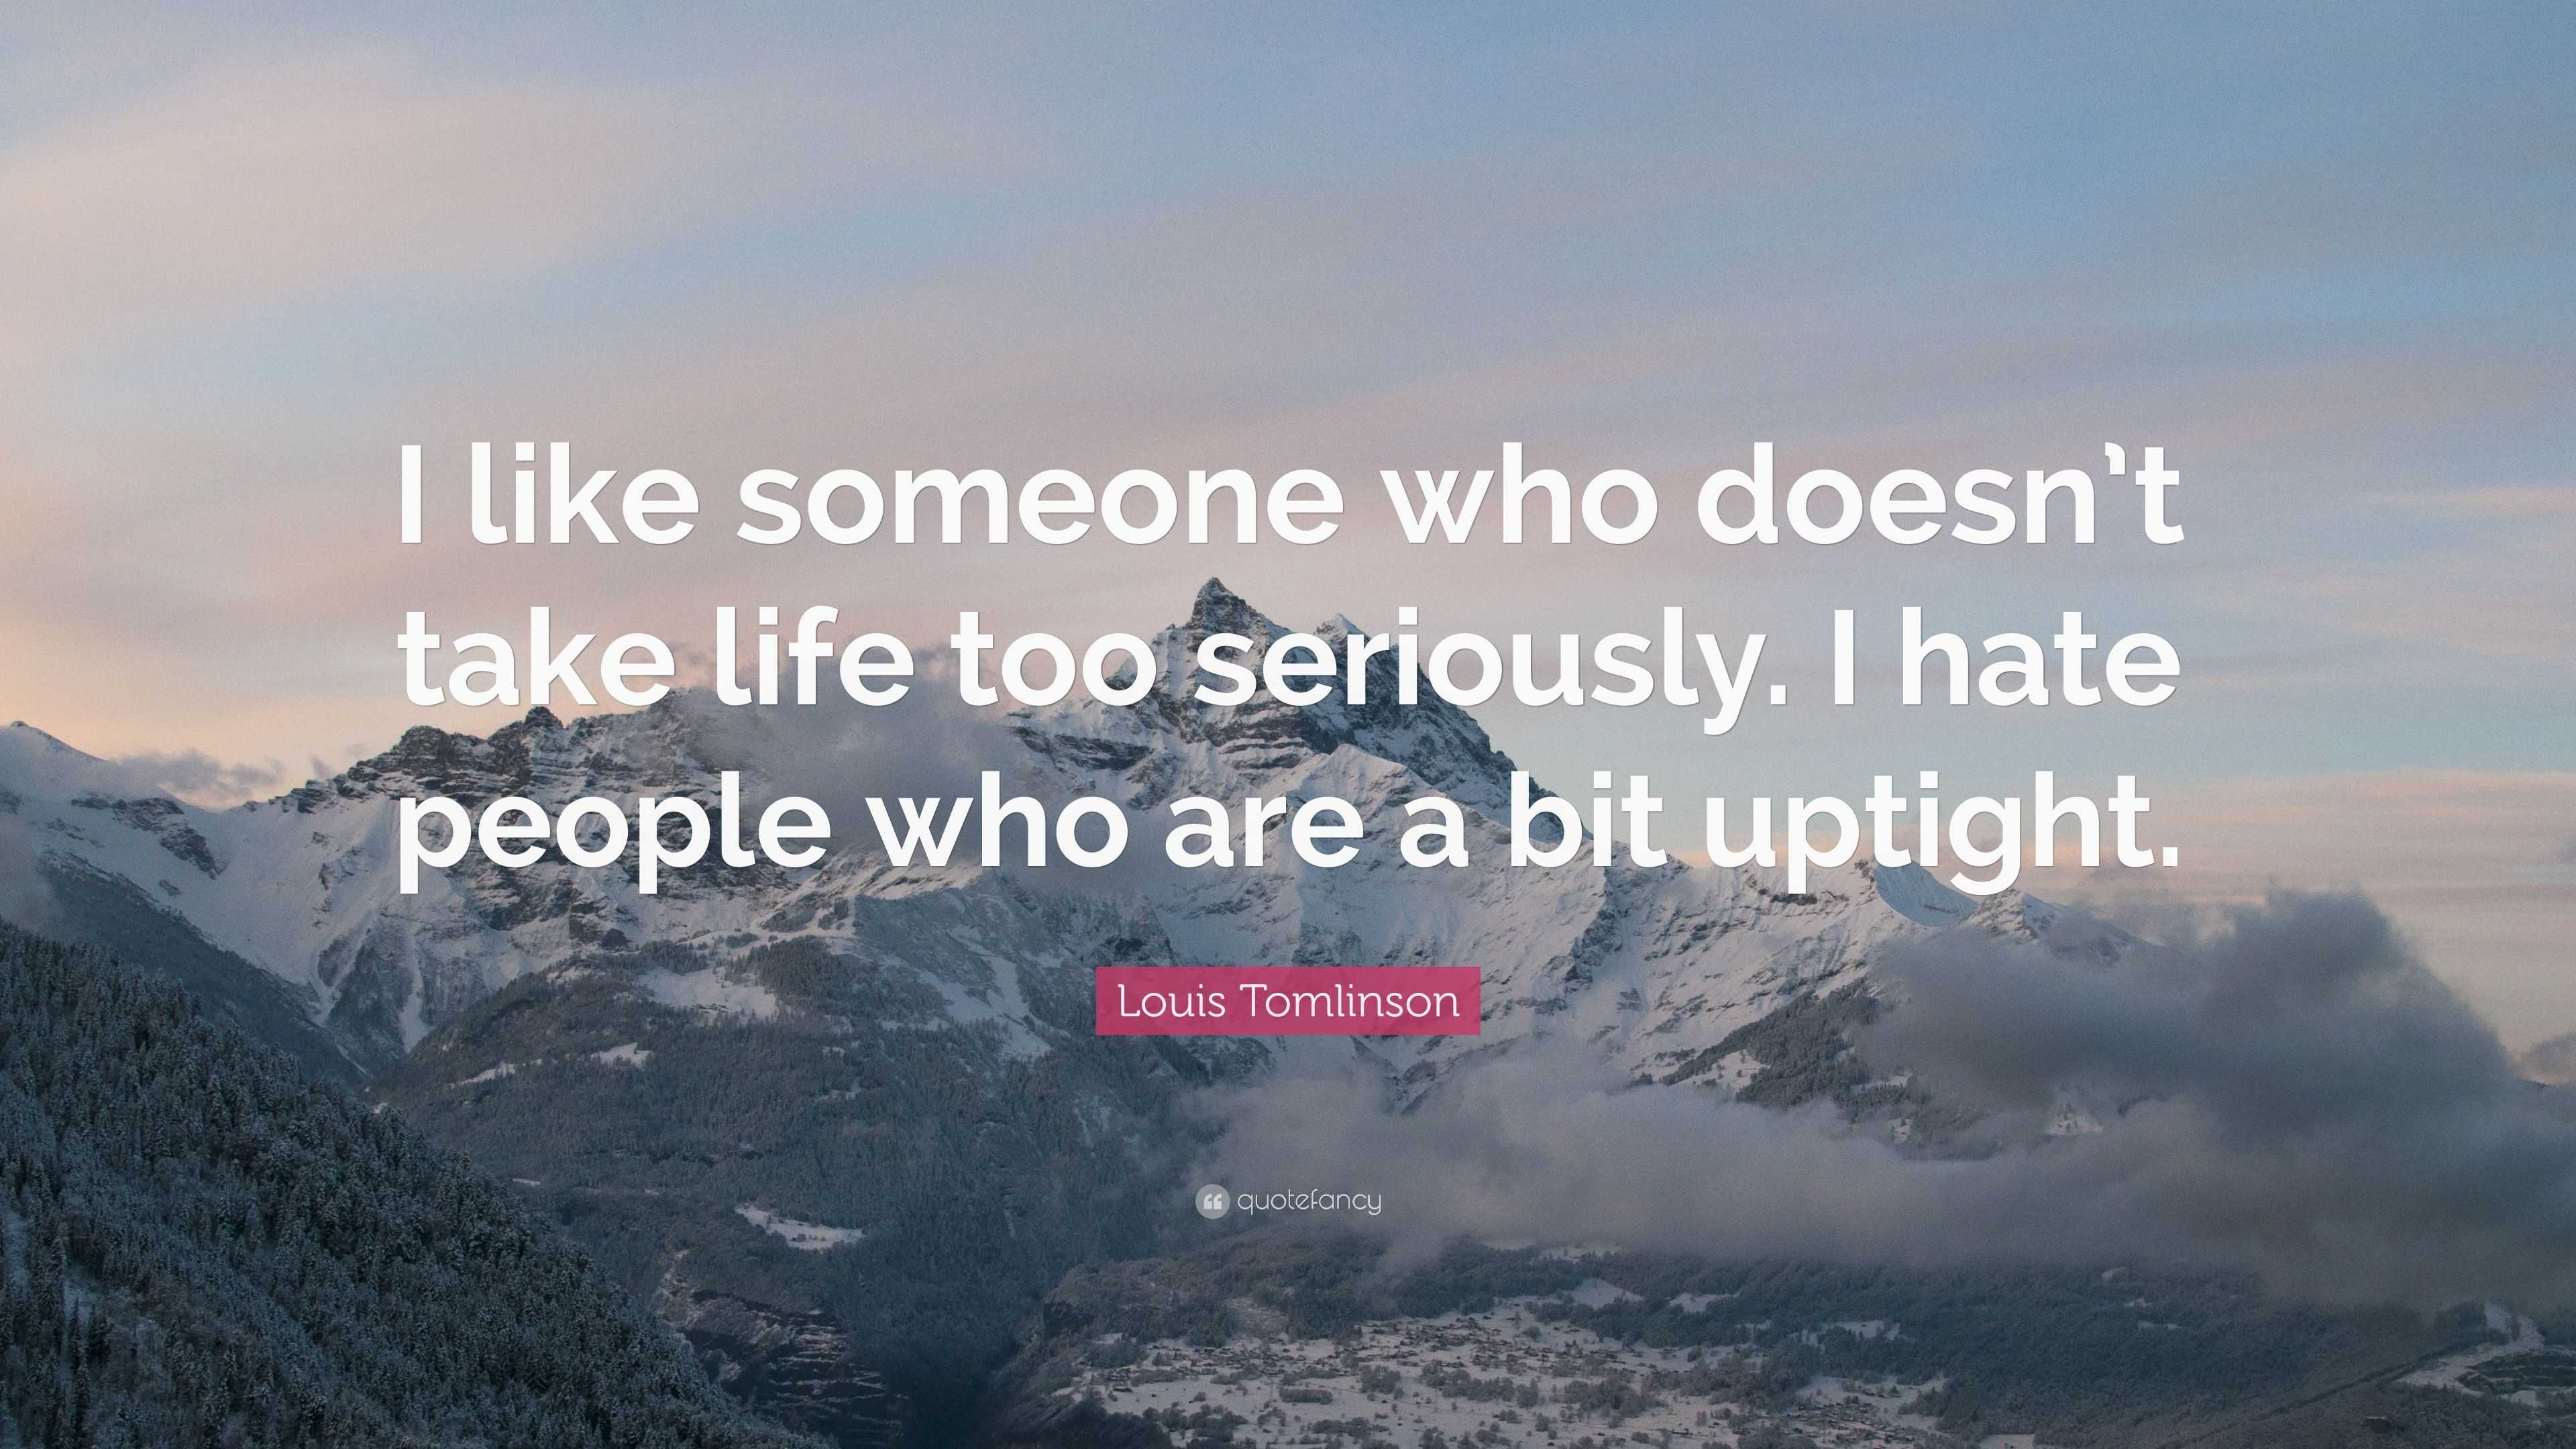 Louis Tomlinson Quote: “I like someone who doesn’t take life too ...